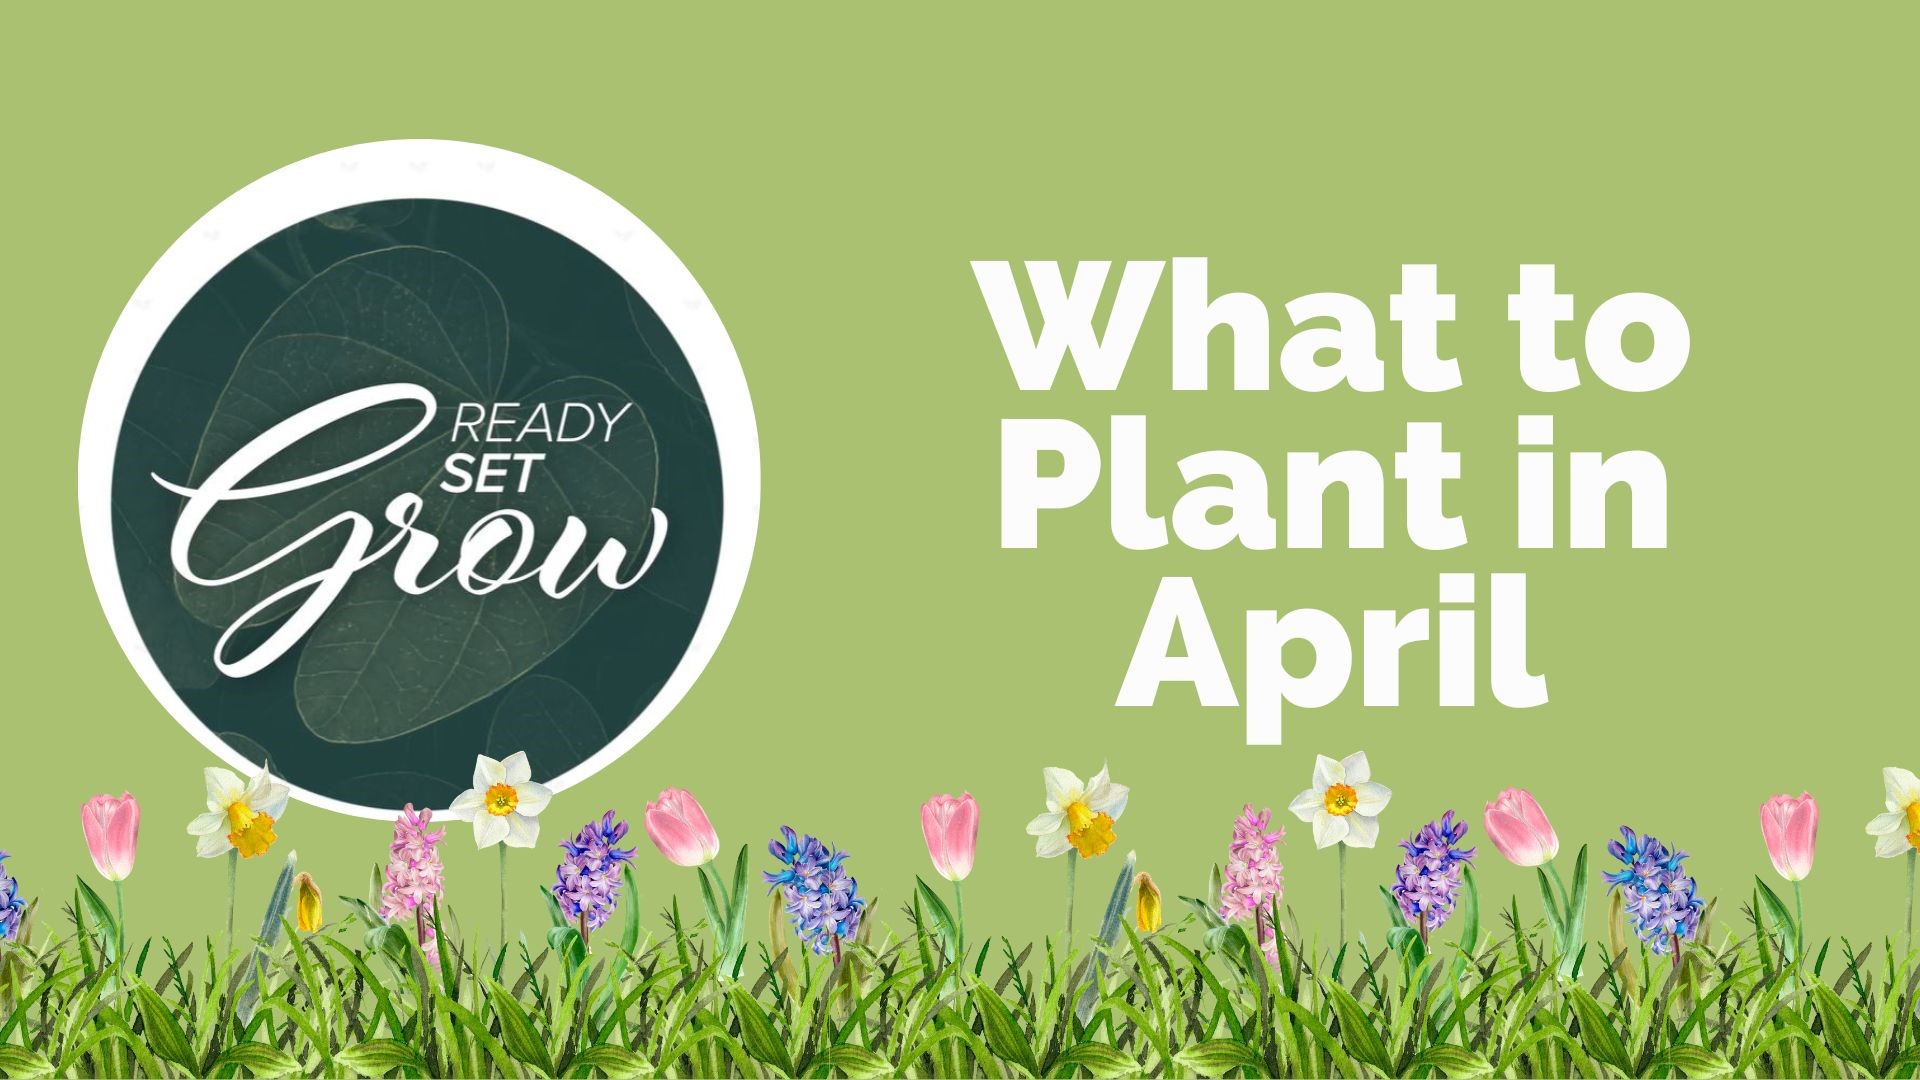 April may seem too early to get into the garden, but there are certain flowers and crops that should be planted now. What to tackle on your to-do list and more.